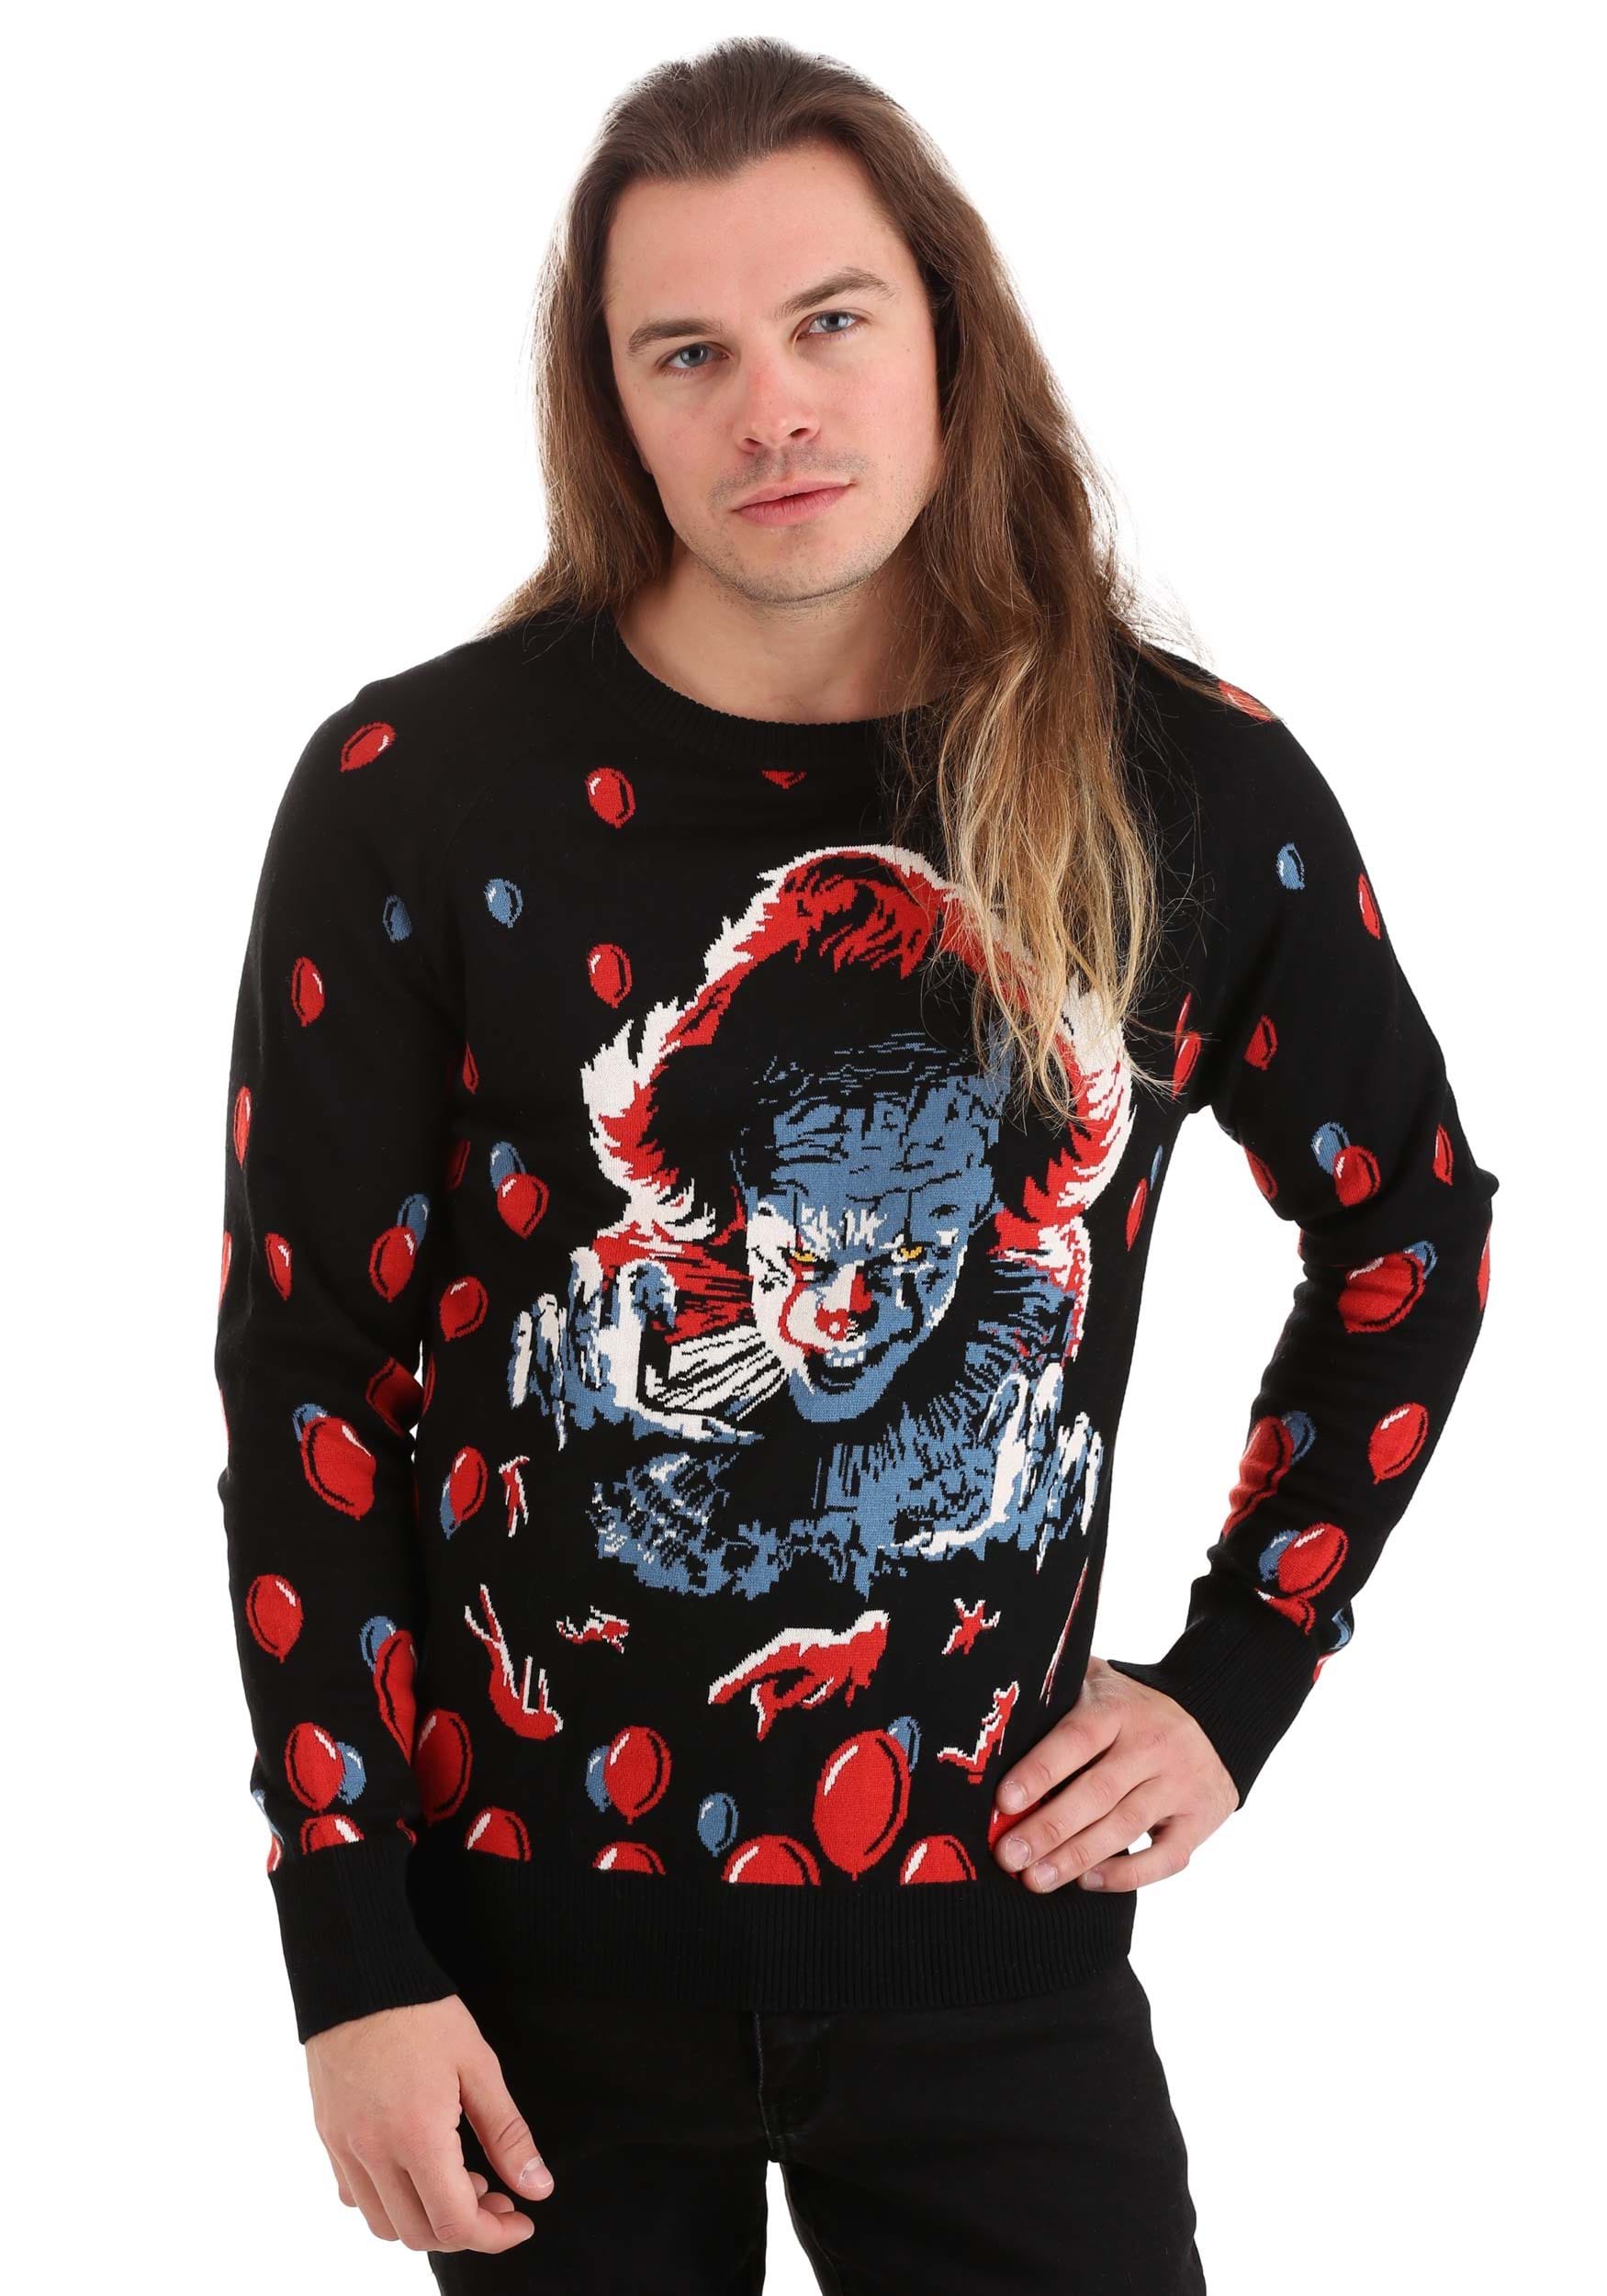 Photos - Fancy Dress IT Luggage FUN Wear IT  Pennywise Adult Ugly Sweater Black/Red/White FU (2019)